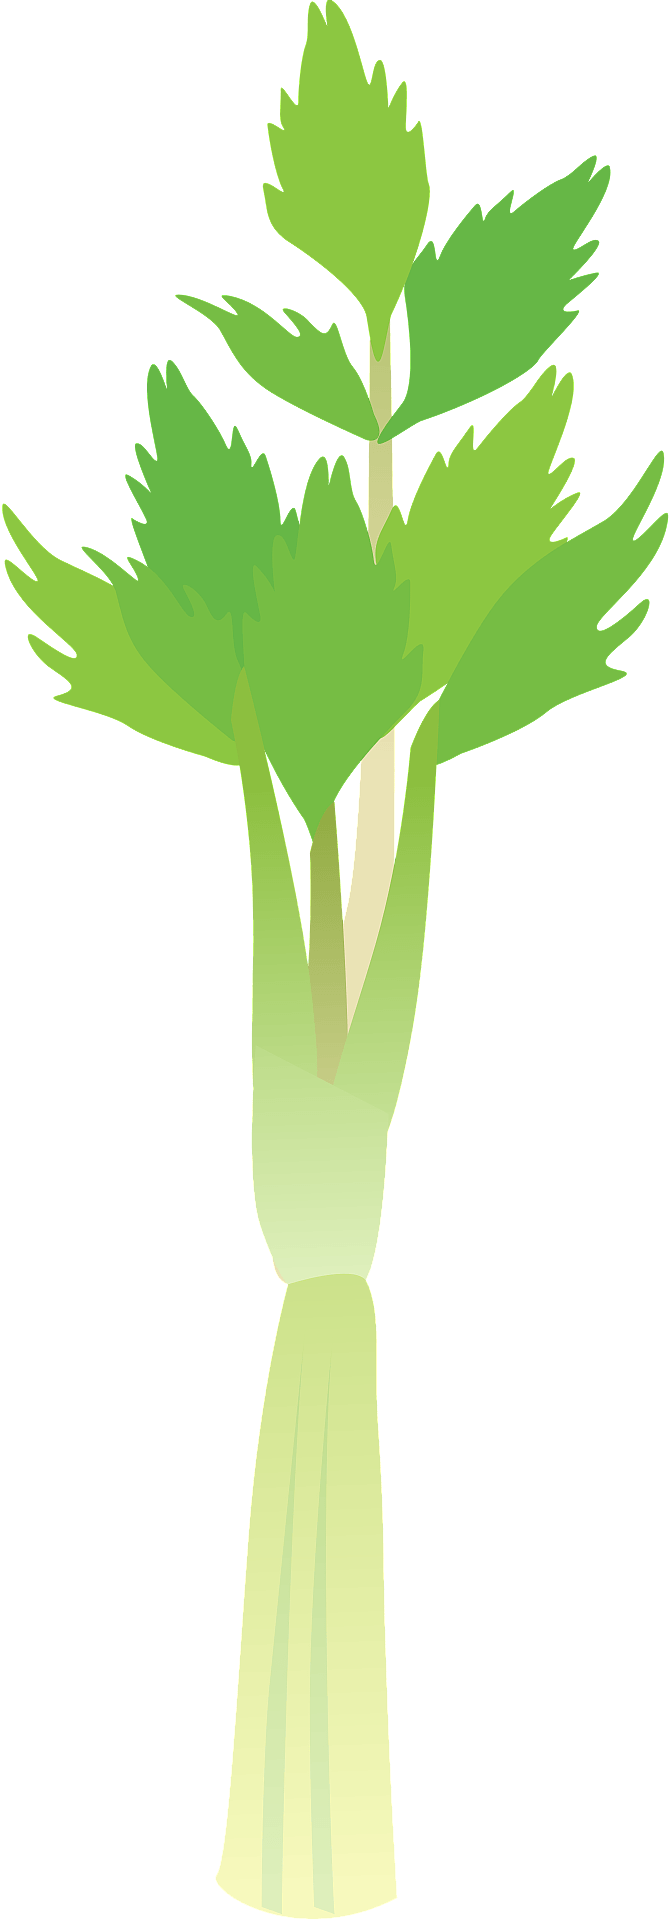 Celery Green Organic Photos Free Download PNG HQ PNG Image